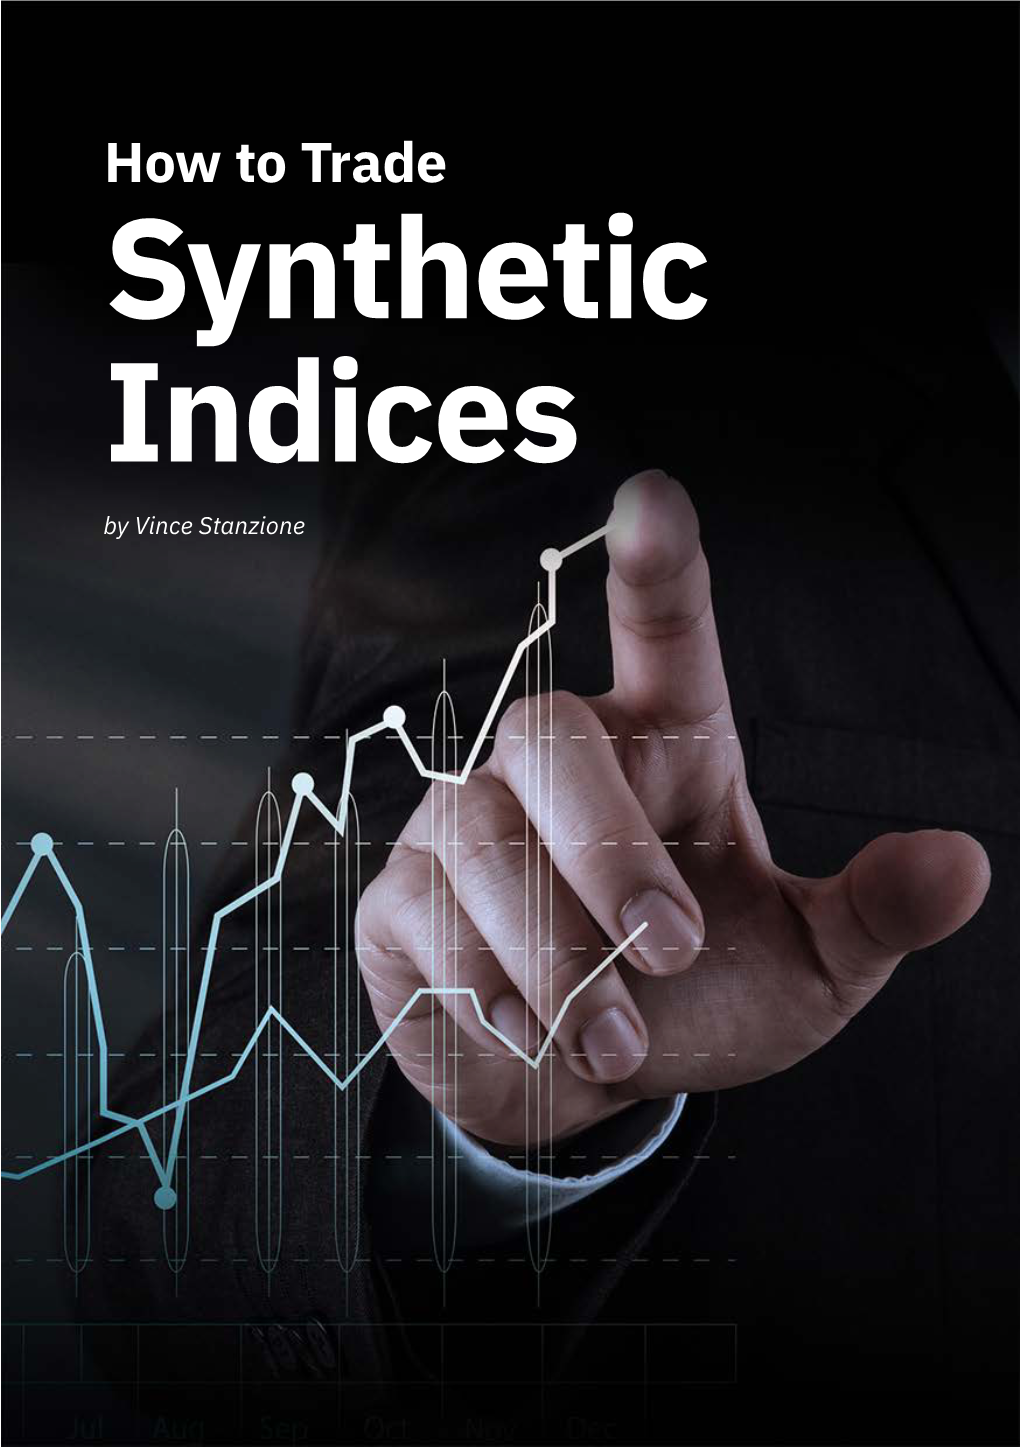 How to Trade Synthetic Indices by Vince Stanzione Disclaimer